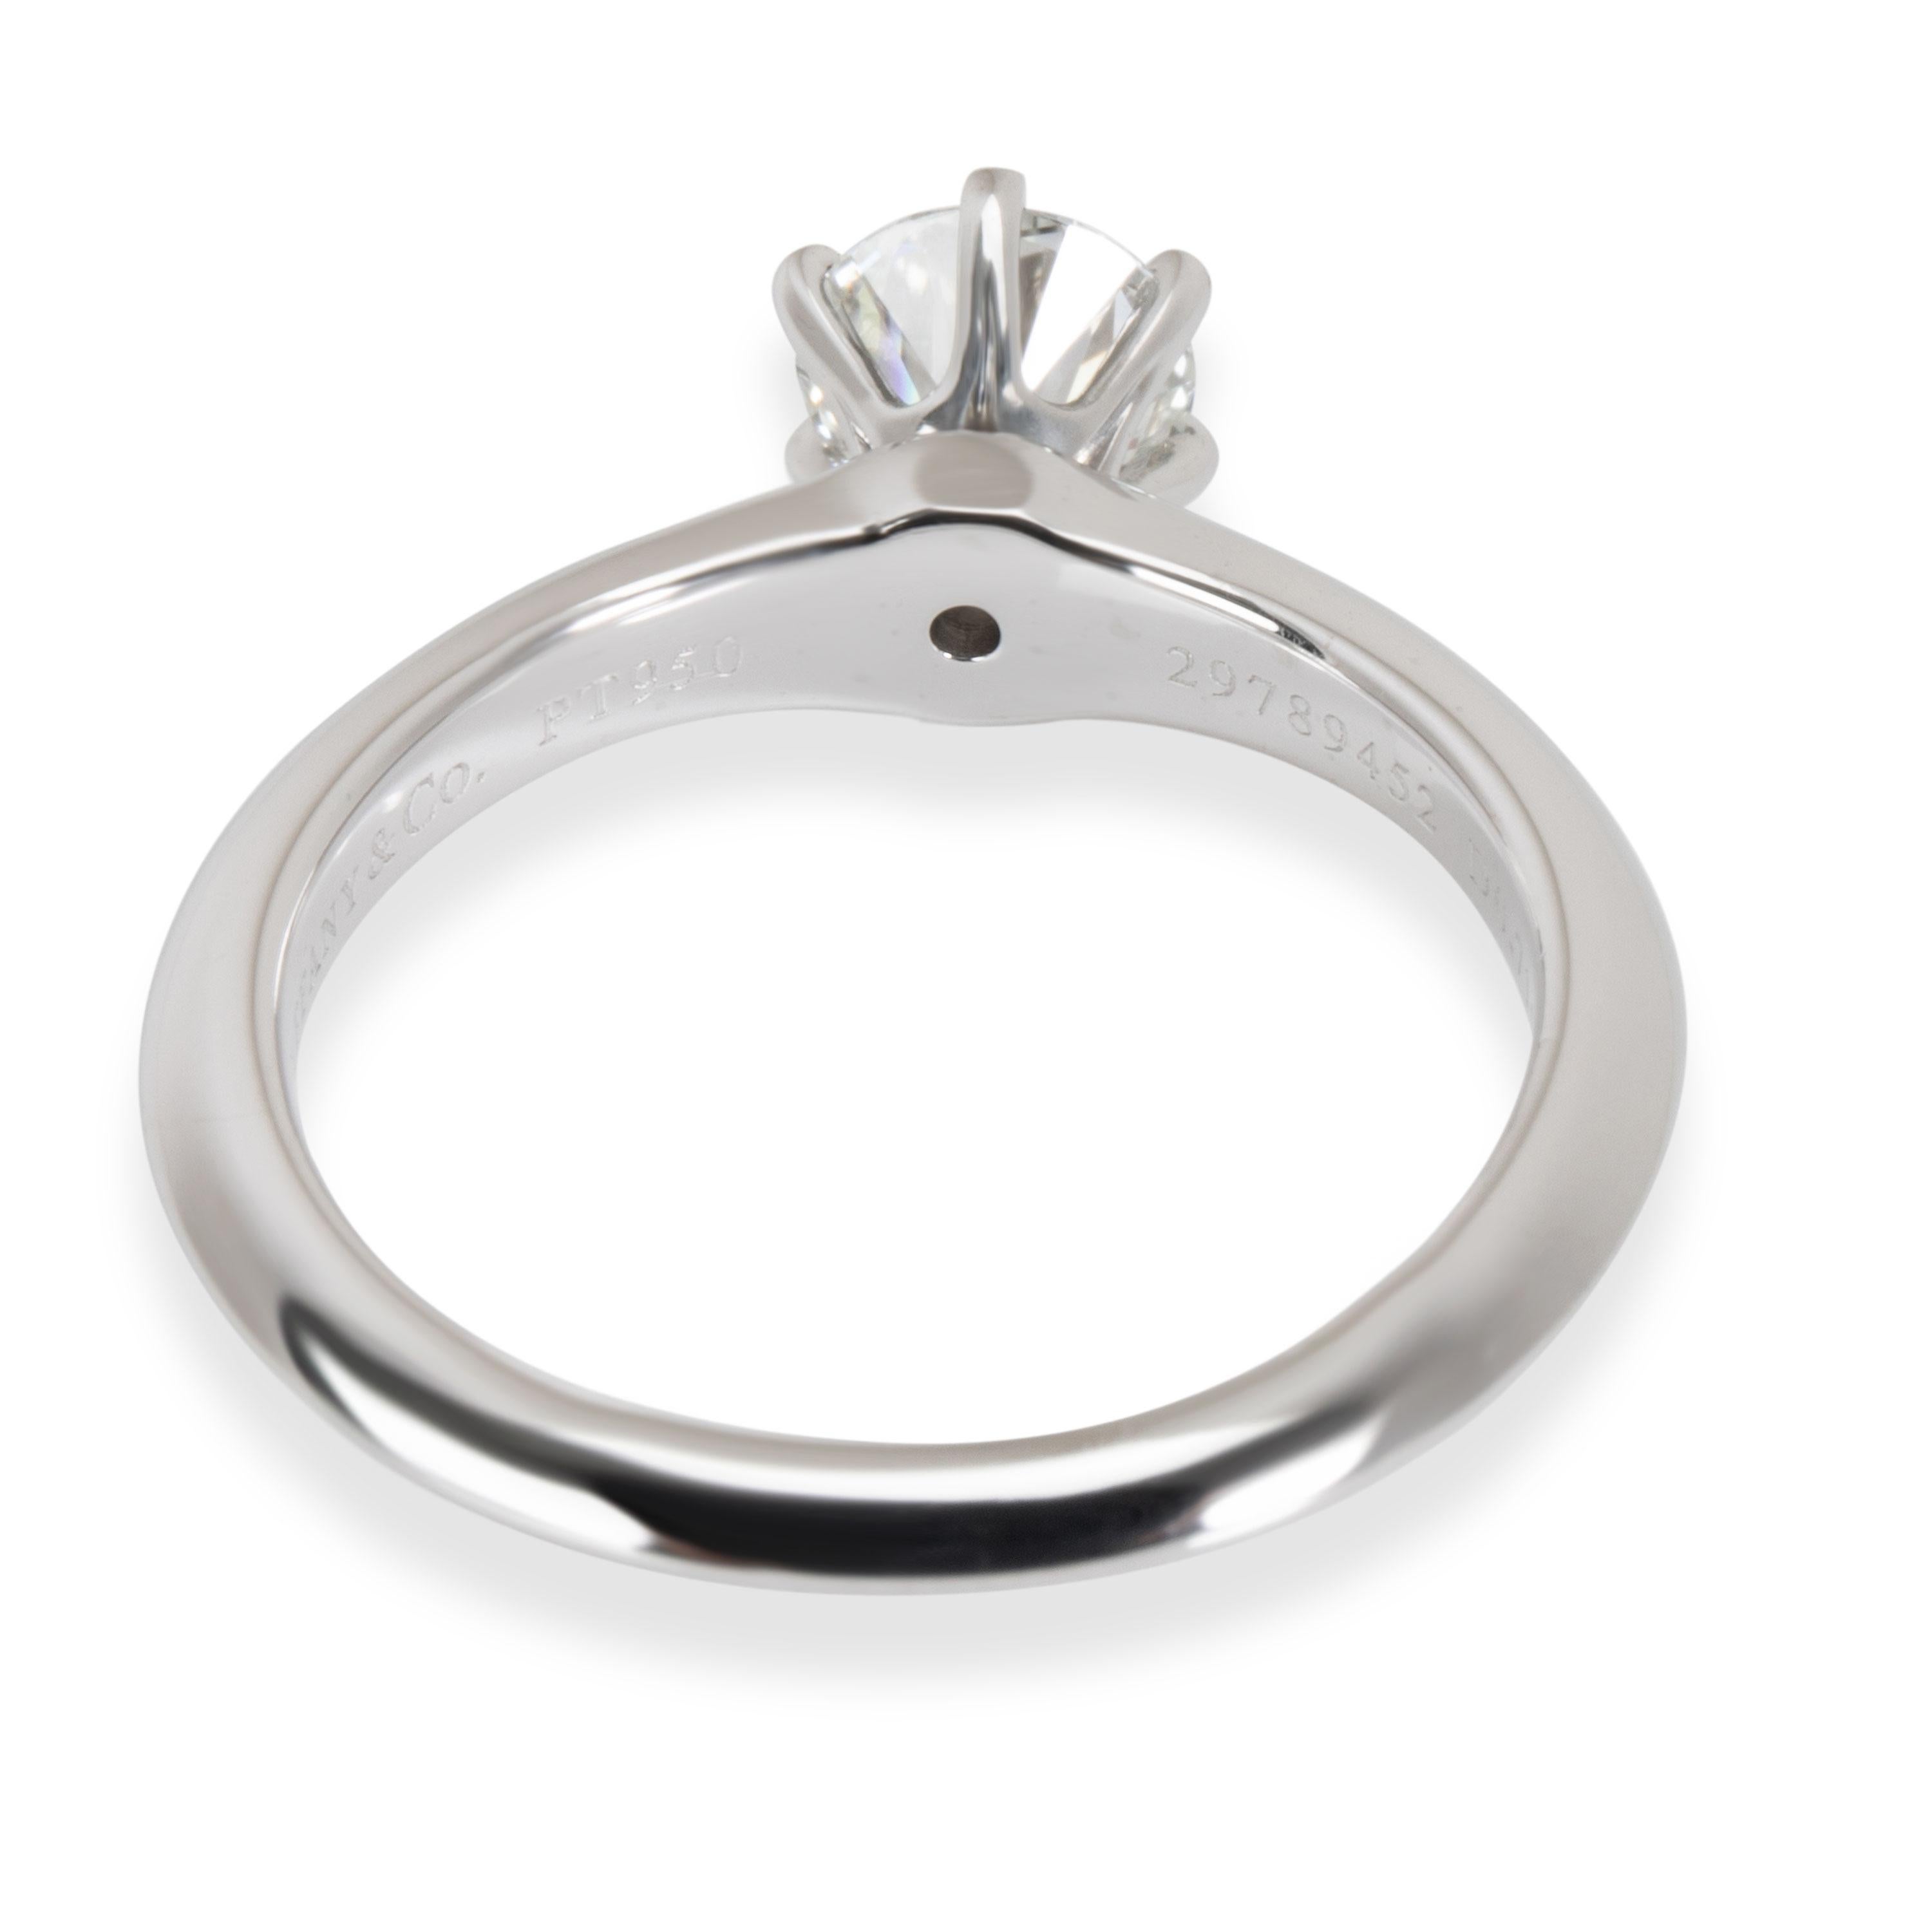 Tiffany & Co. Diamond Engagement Ring in Platinum (0.71 ct E/VVS2)

PRIMARY DETAILS

SKU: 104508

Tiffany & Co. Diamond Engagement Ring in Platinum (0.71 ct E/VVS2)

Condition Description: Retails for 9,900 USD. In excellent condition and recently